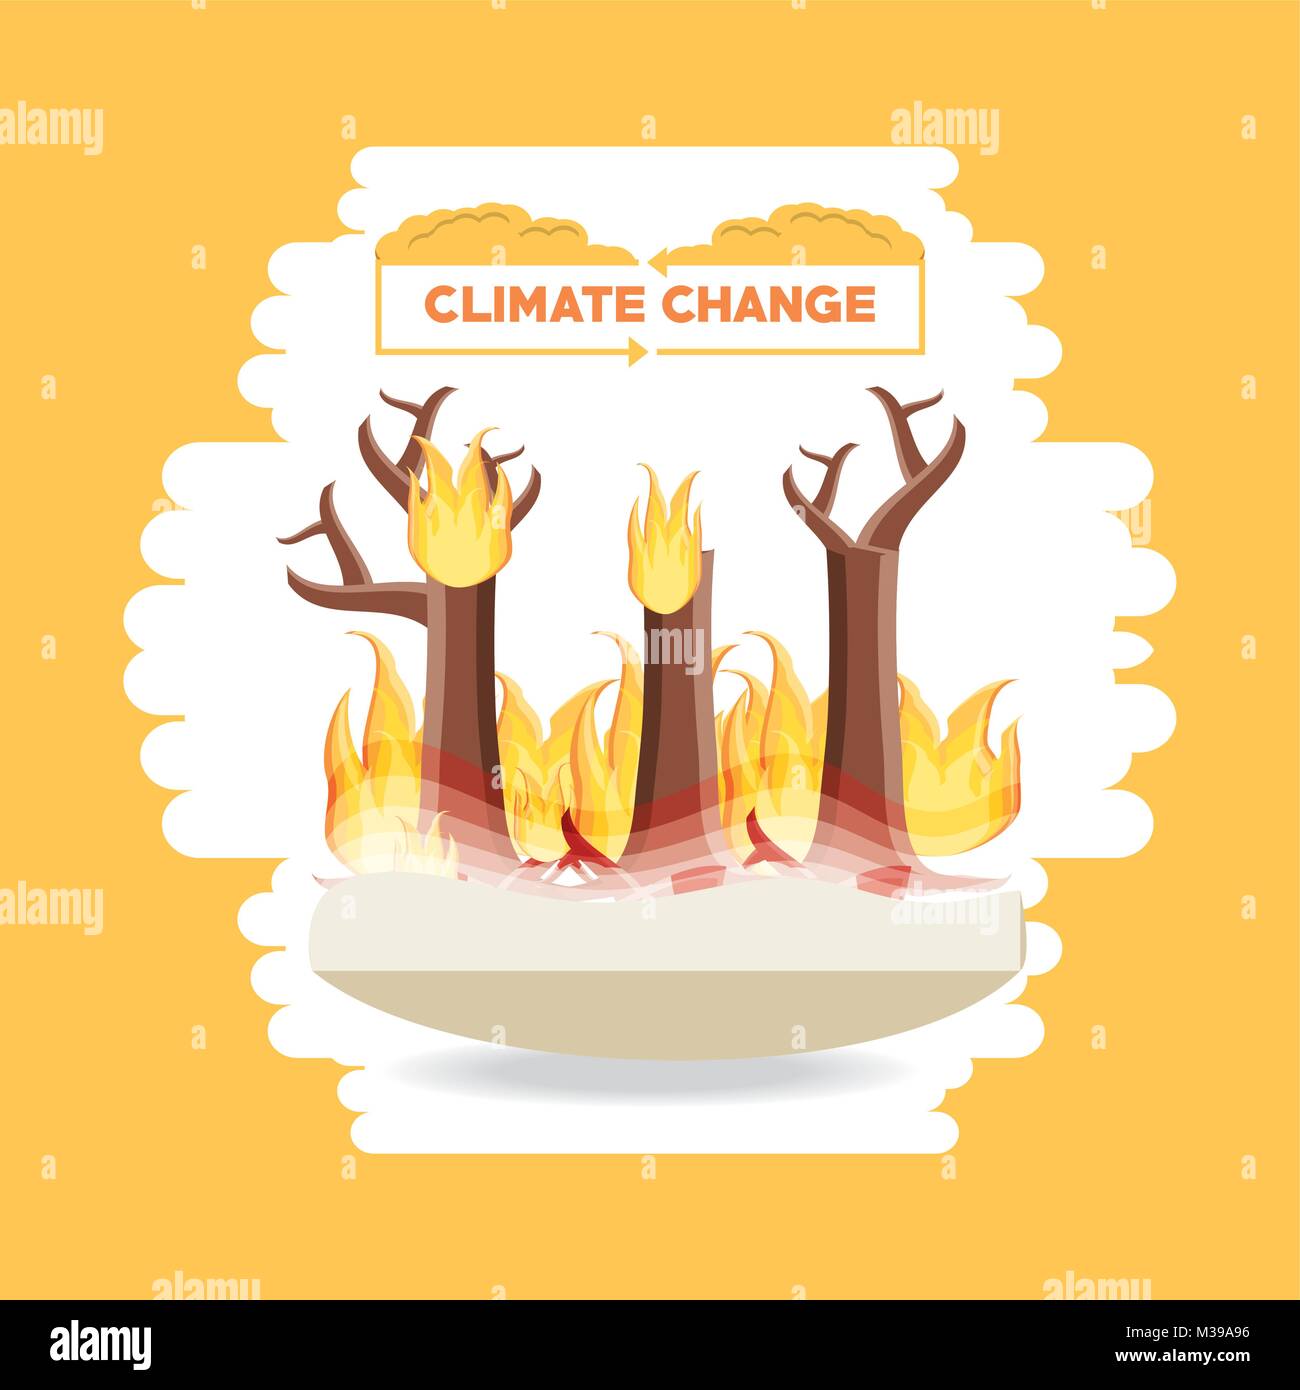 Climate change design Stock Vector